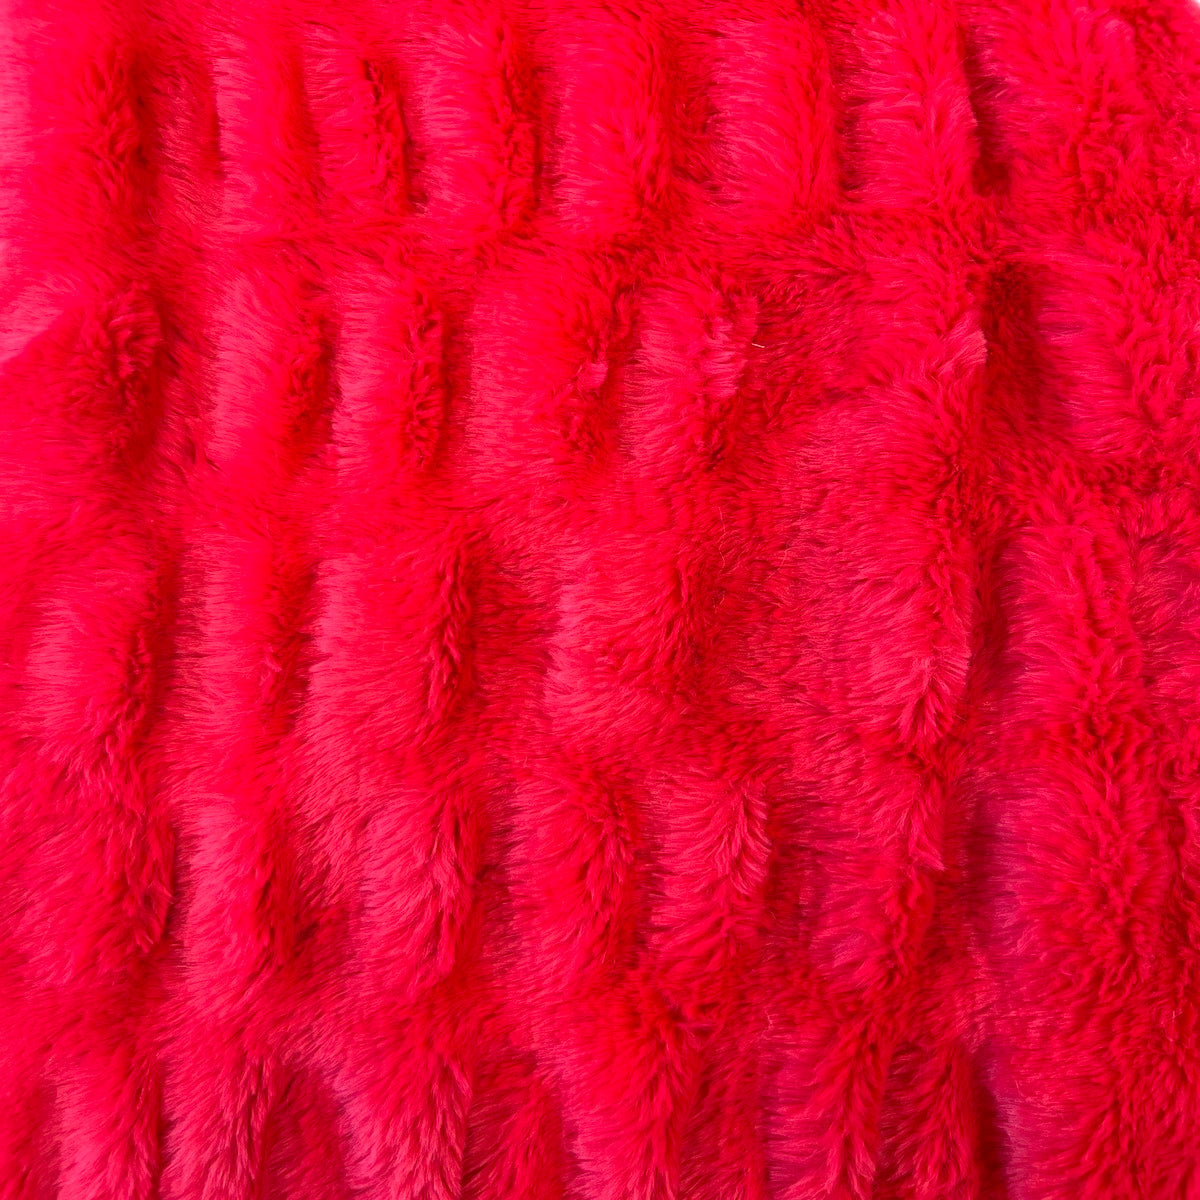 EZ Fabric Stretch Faux Fur Snow Chinchilla Snuggle White/Berry Off-Red |  Very Heavyweight Faux Fur Fabric | Home Decor Fabric | 58 Wide